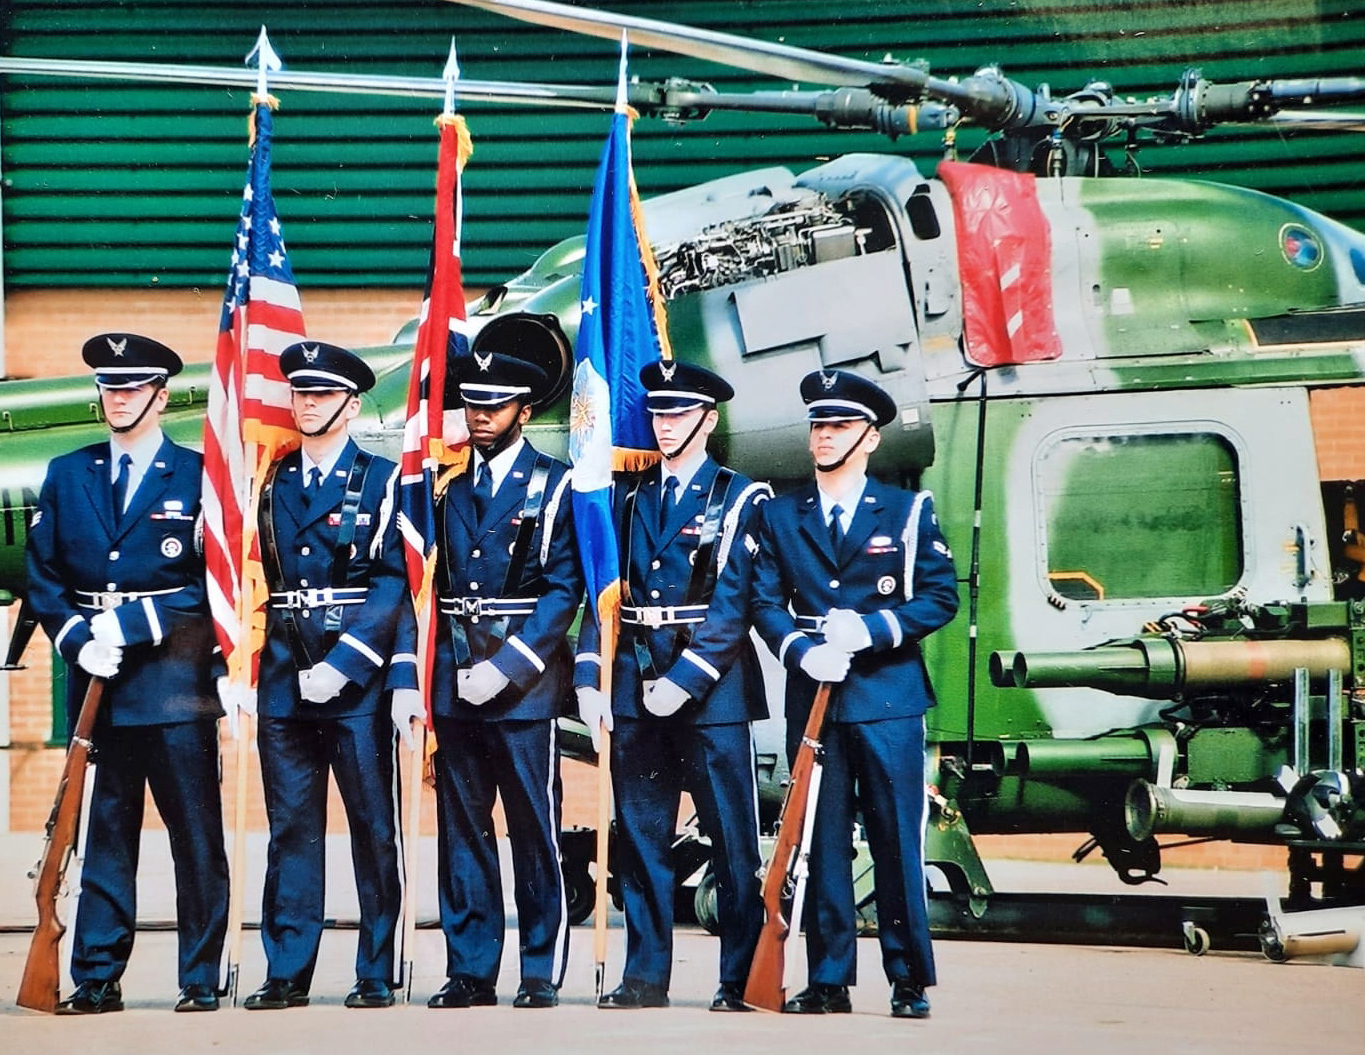 USAF parade in front of Lynx helicopter